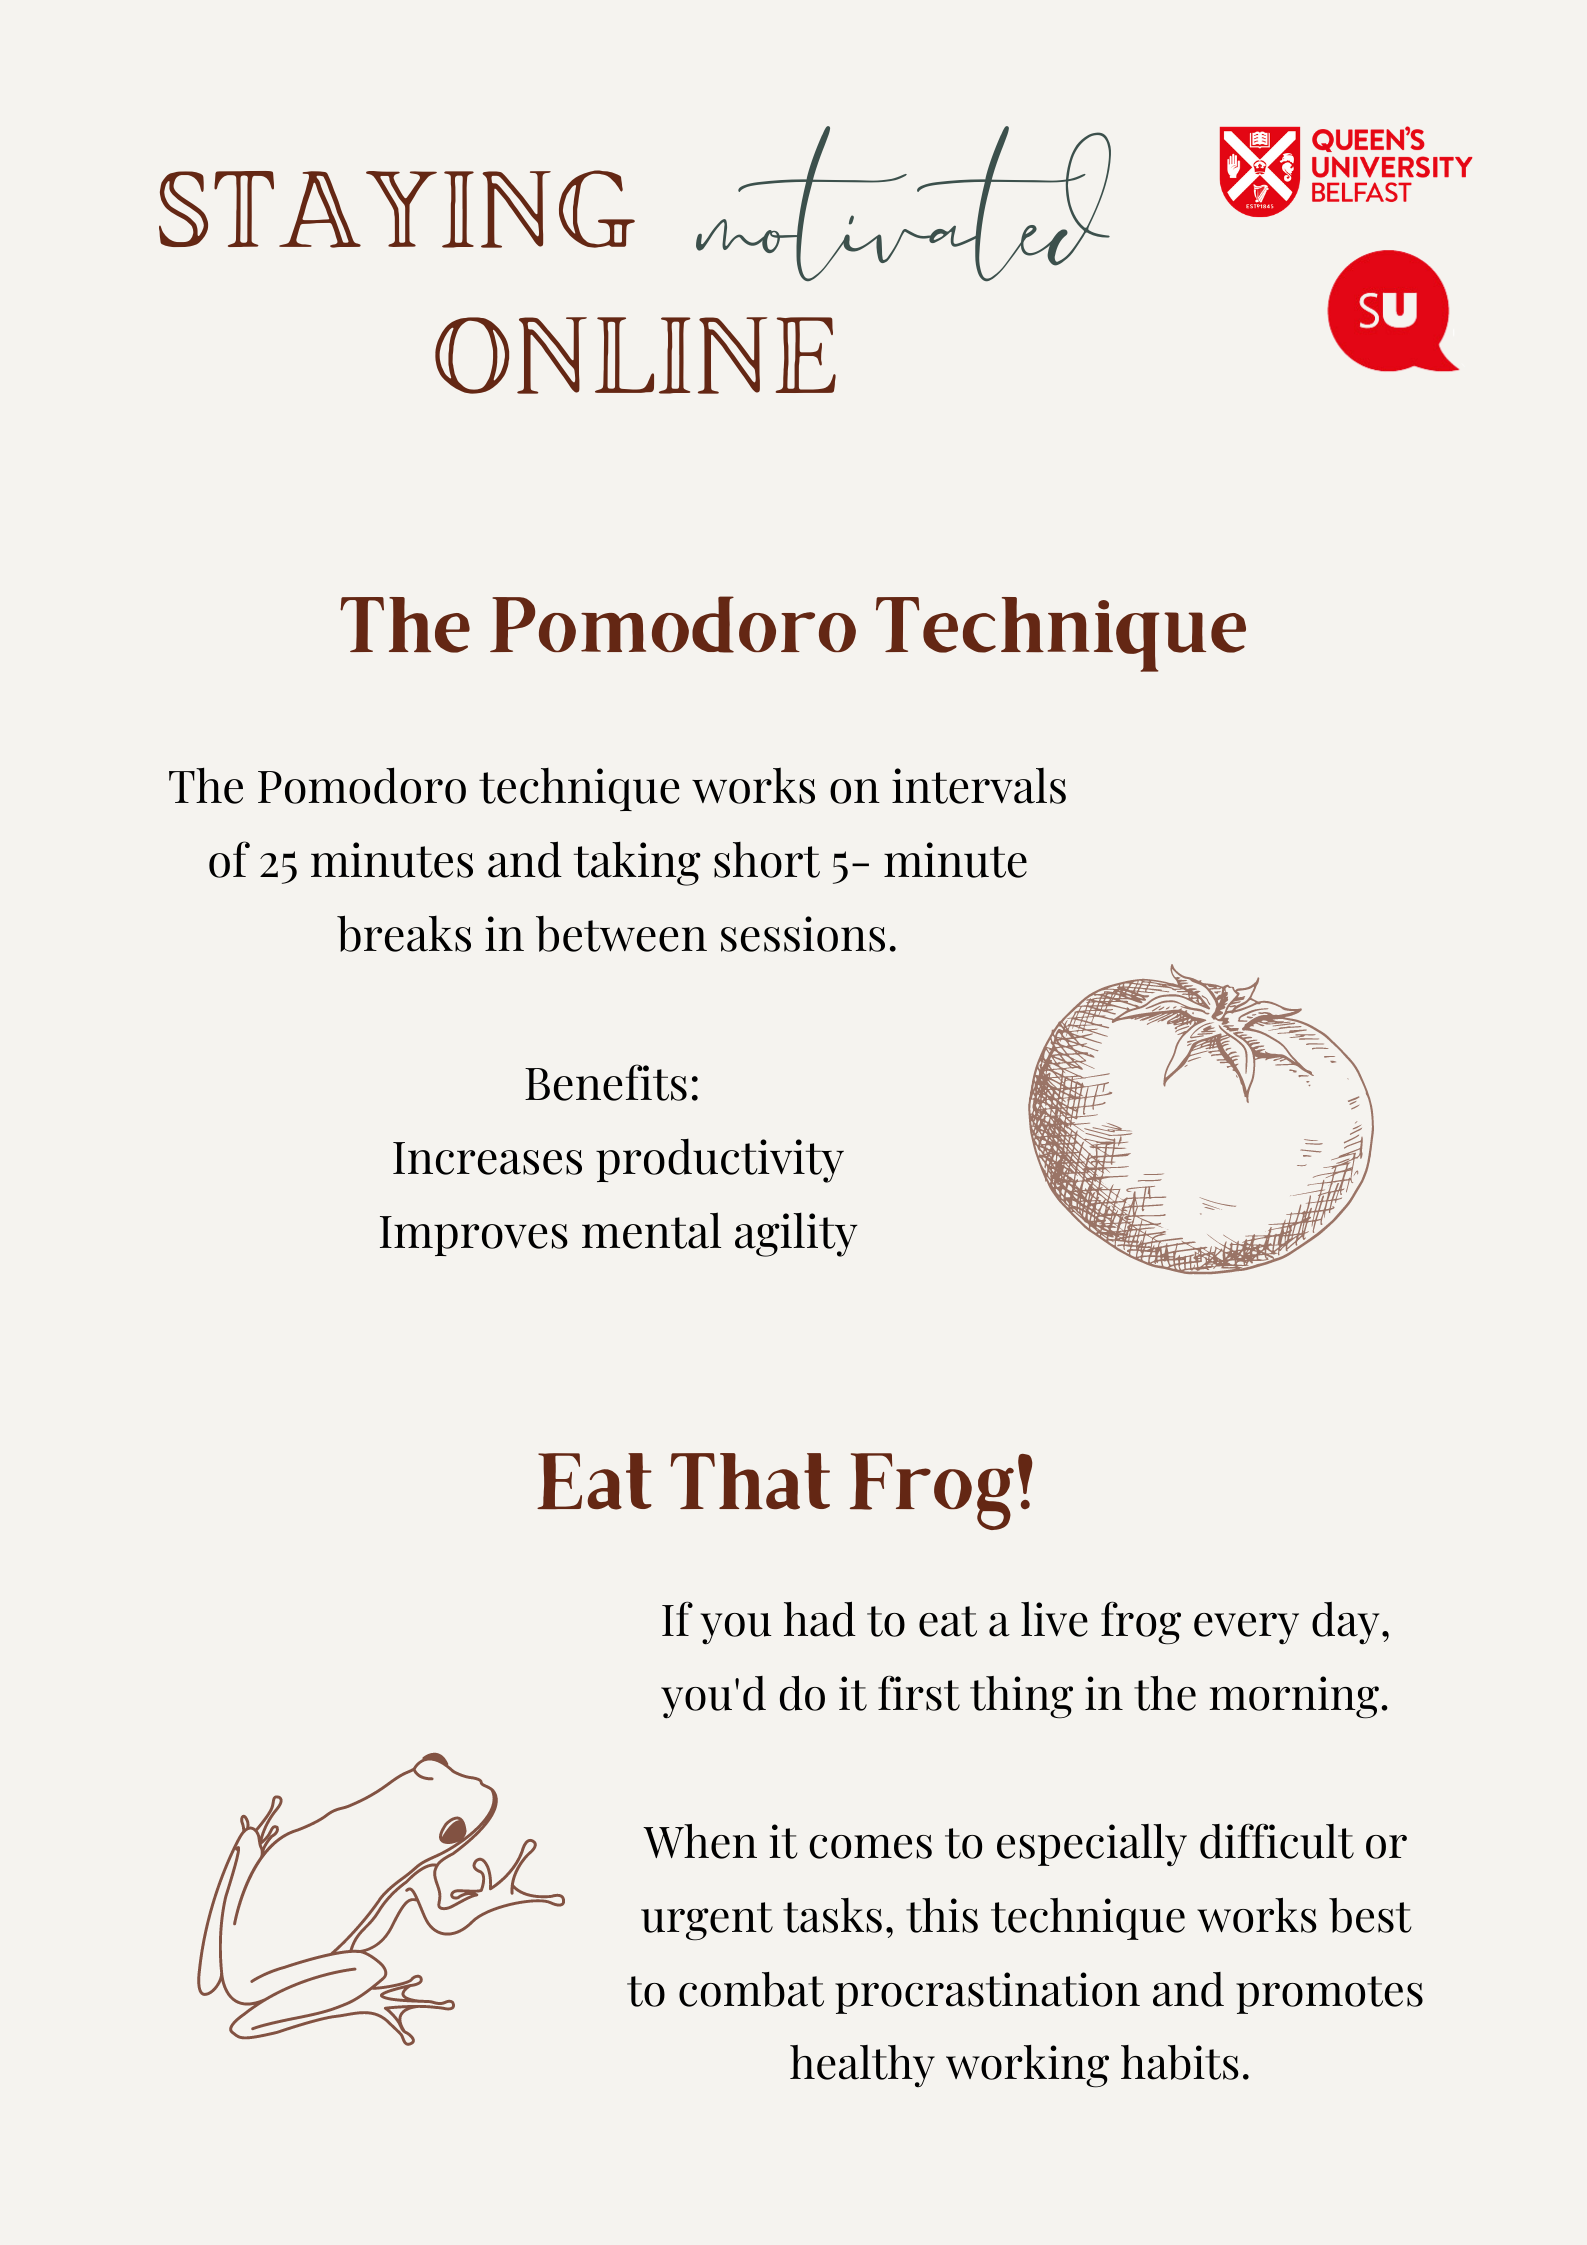 Grey poster with text about pomodoro technique with images of a frog and tomato